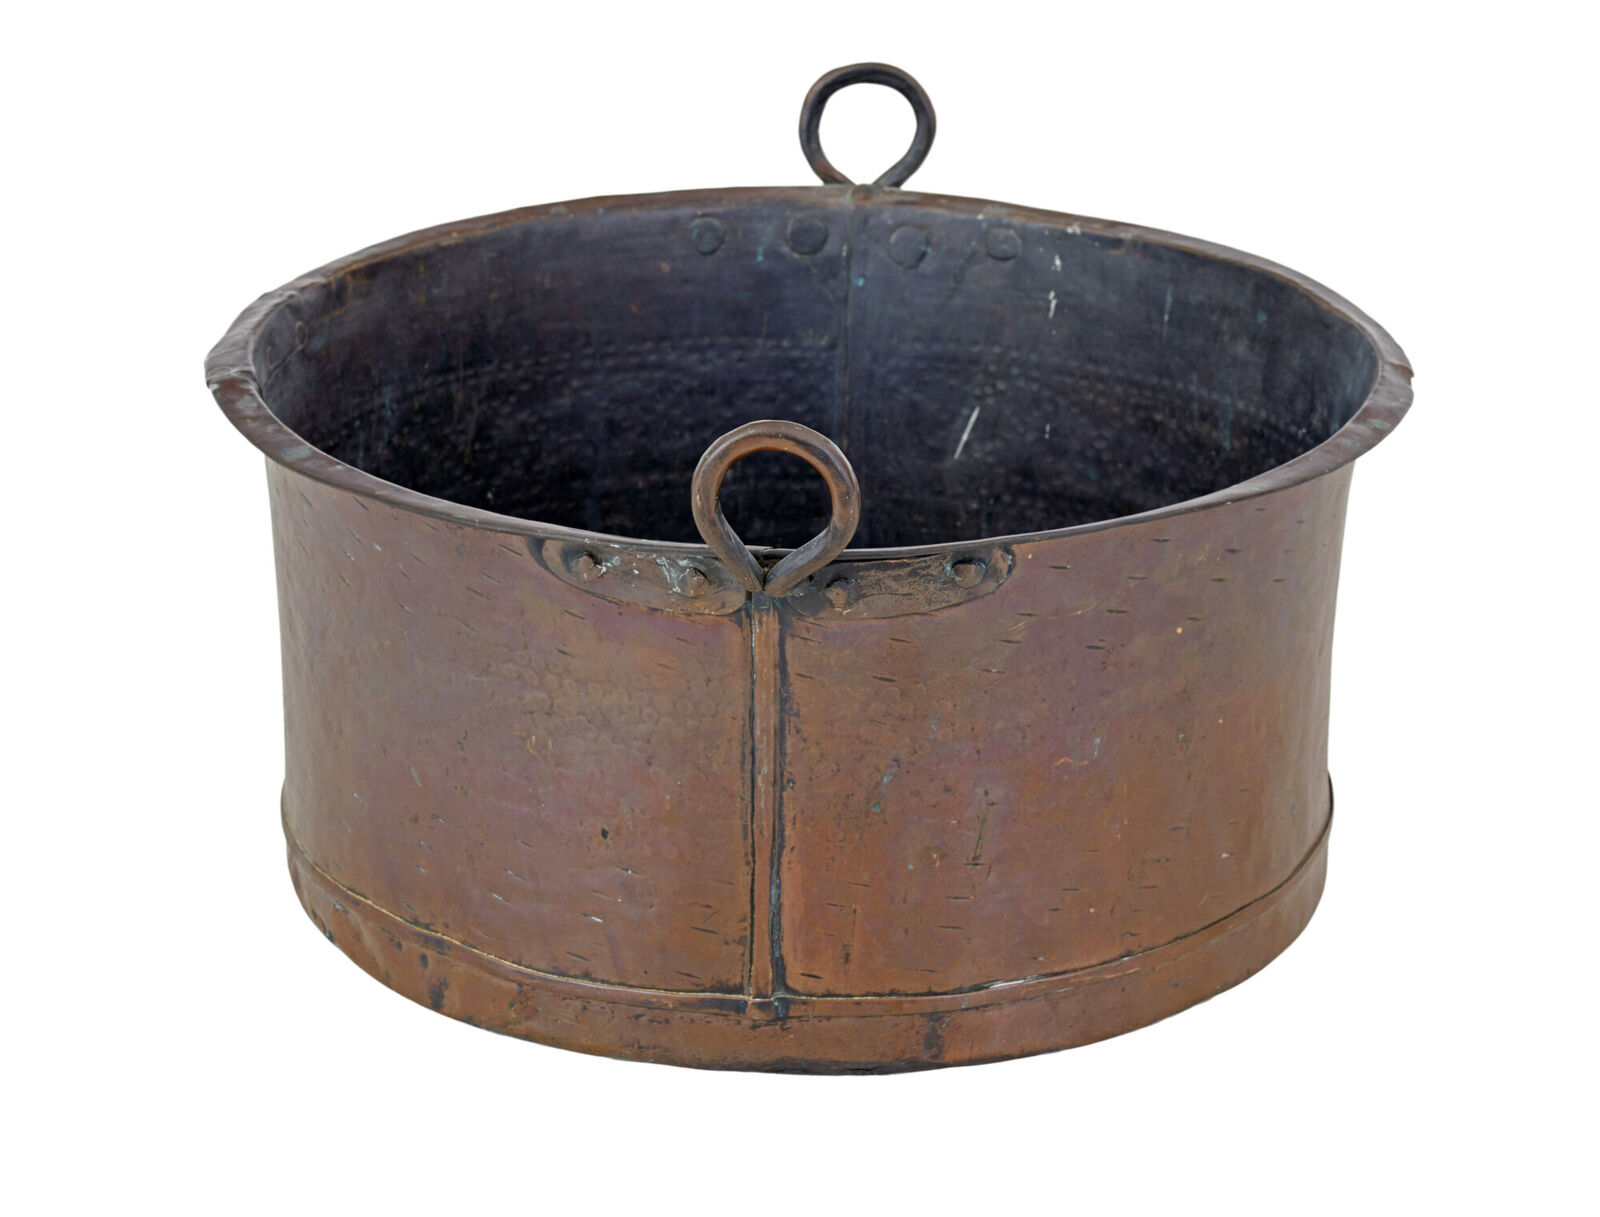 19TH CENTURY LARGE COPPER COOKING VESSEL